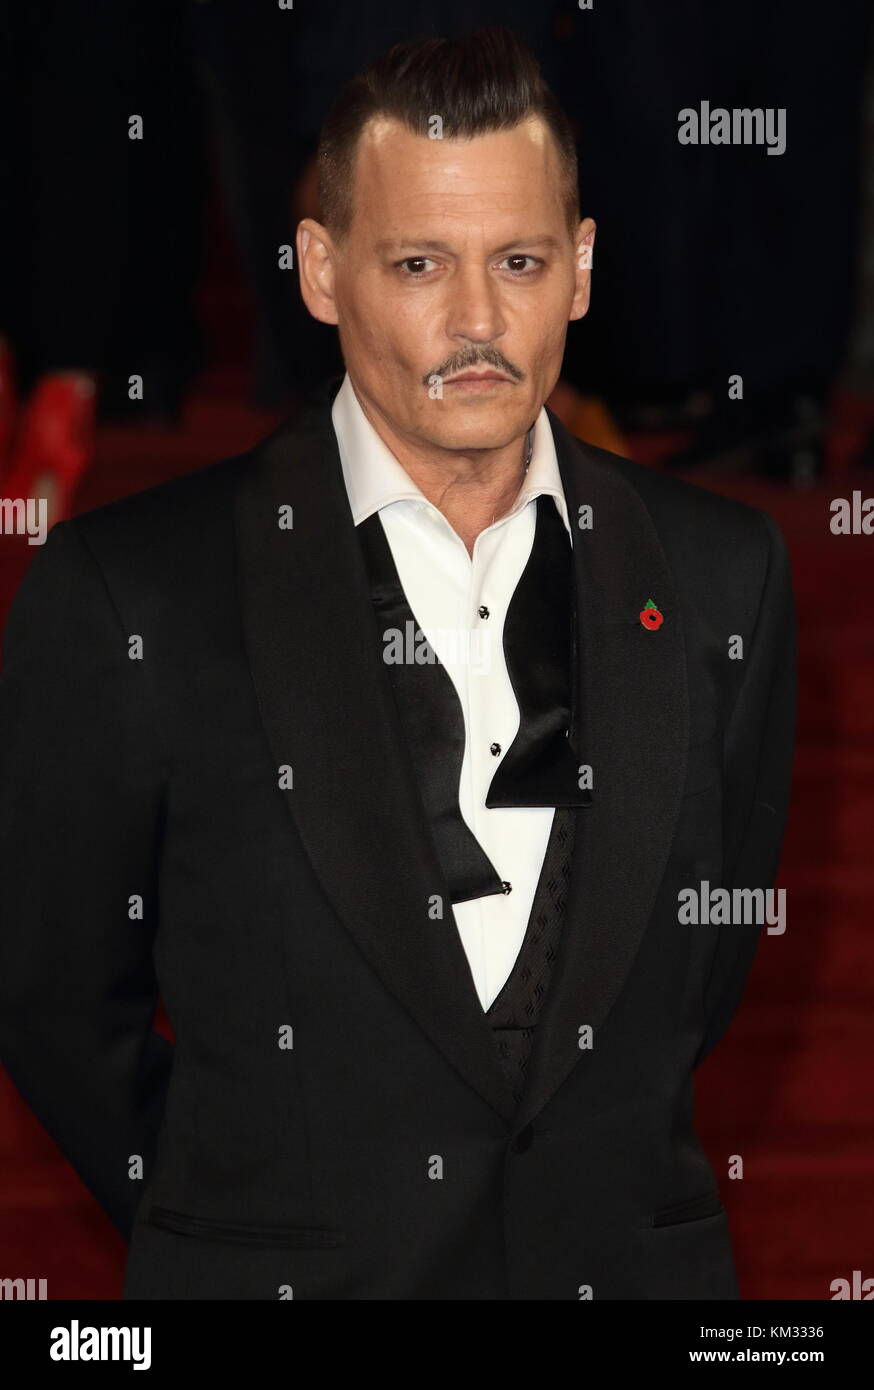 Murder on the Orient Express - World Premiere at the Royal Albert Hall ...